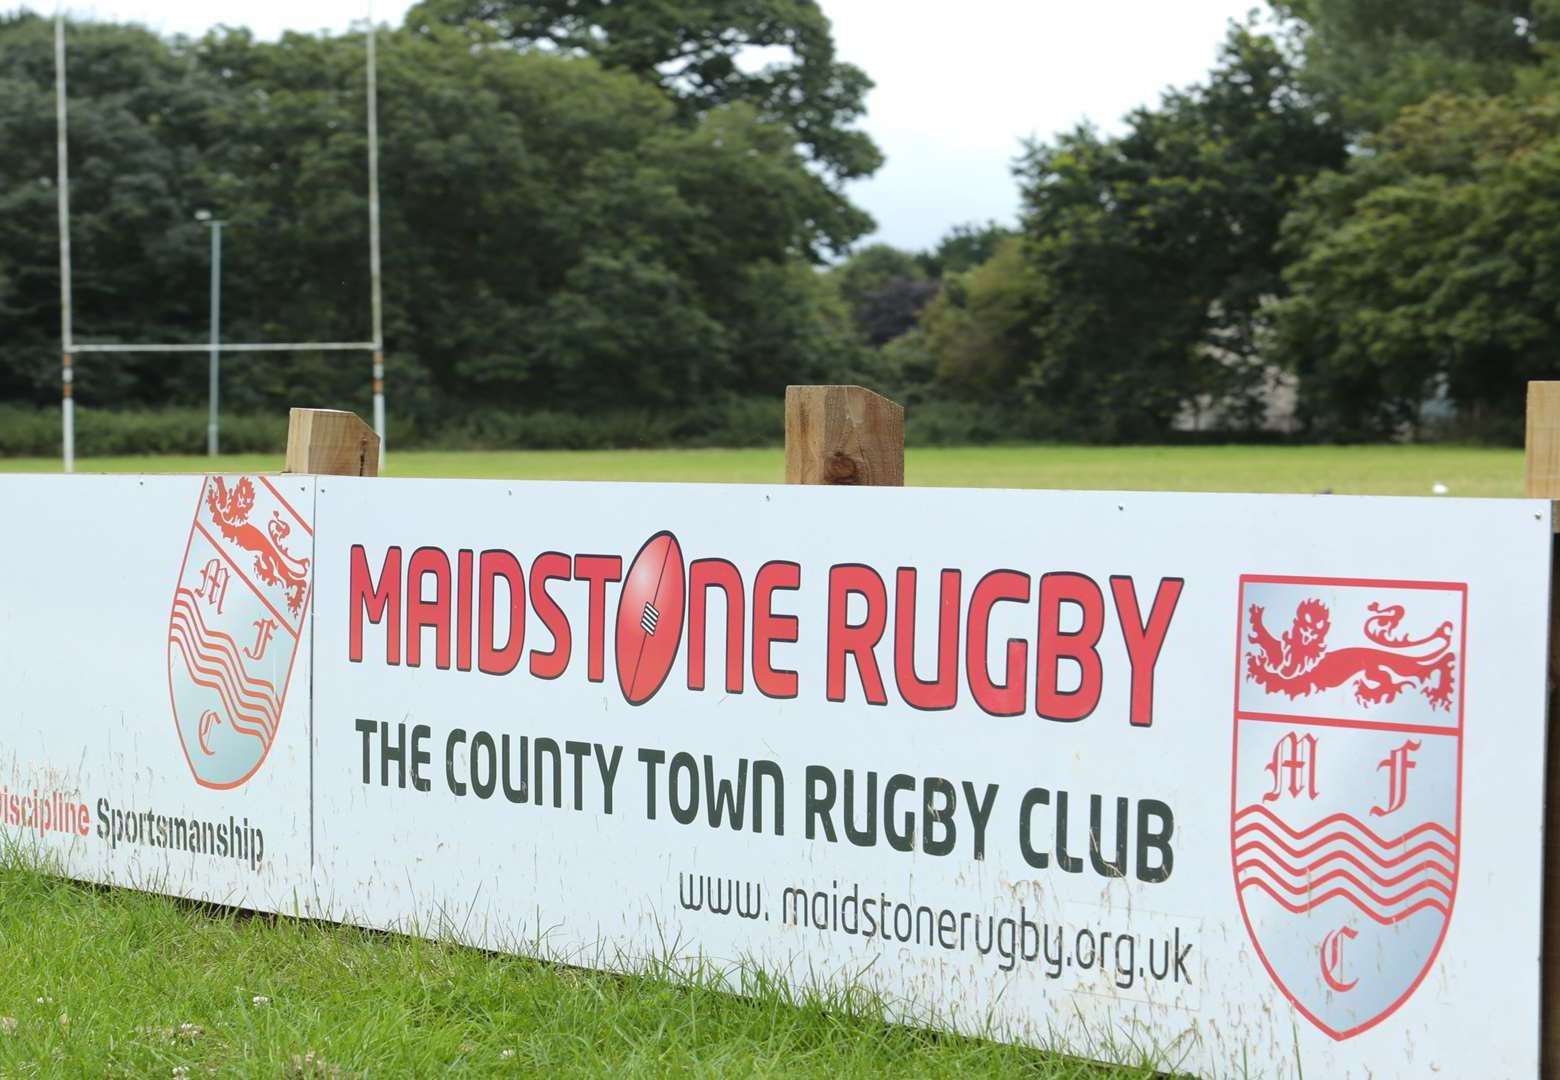 Maidstone Rugby Club made a winning start to the new season.